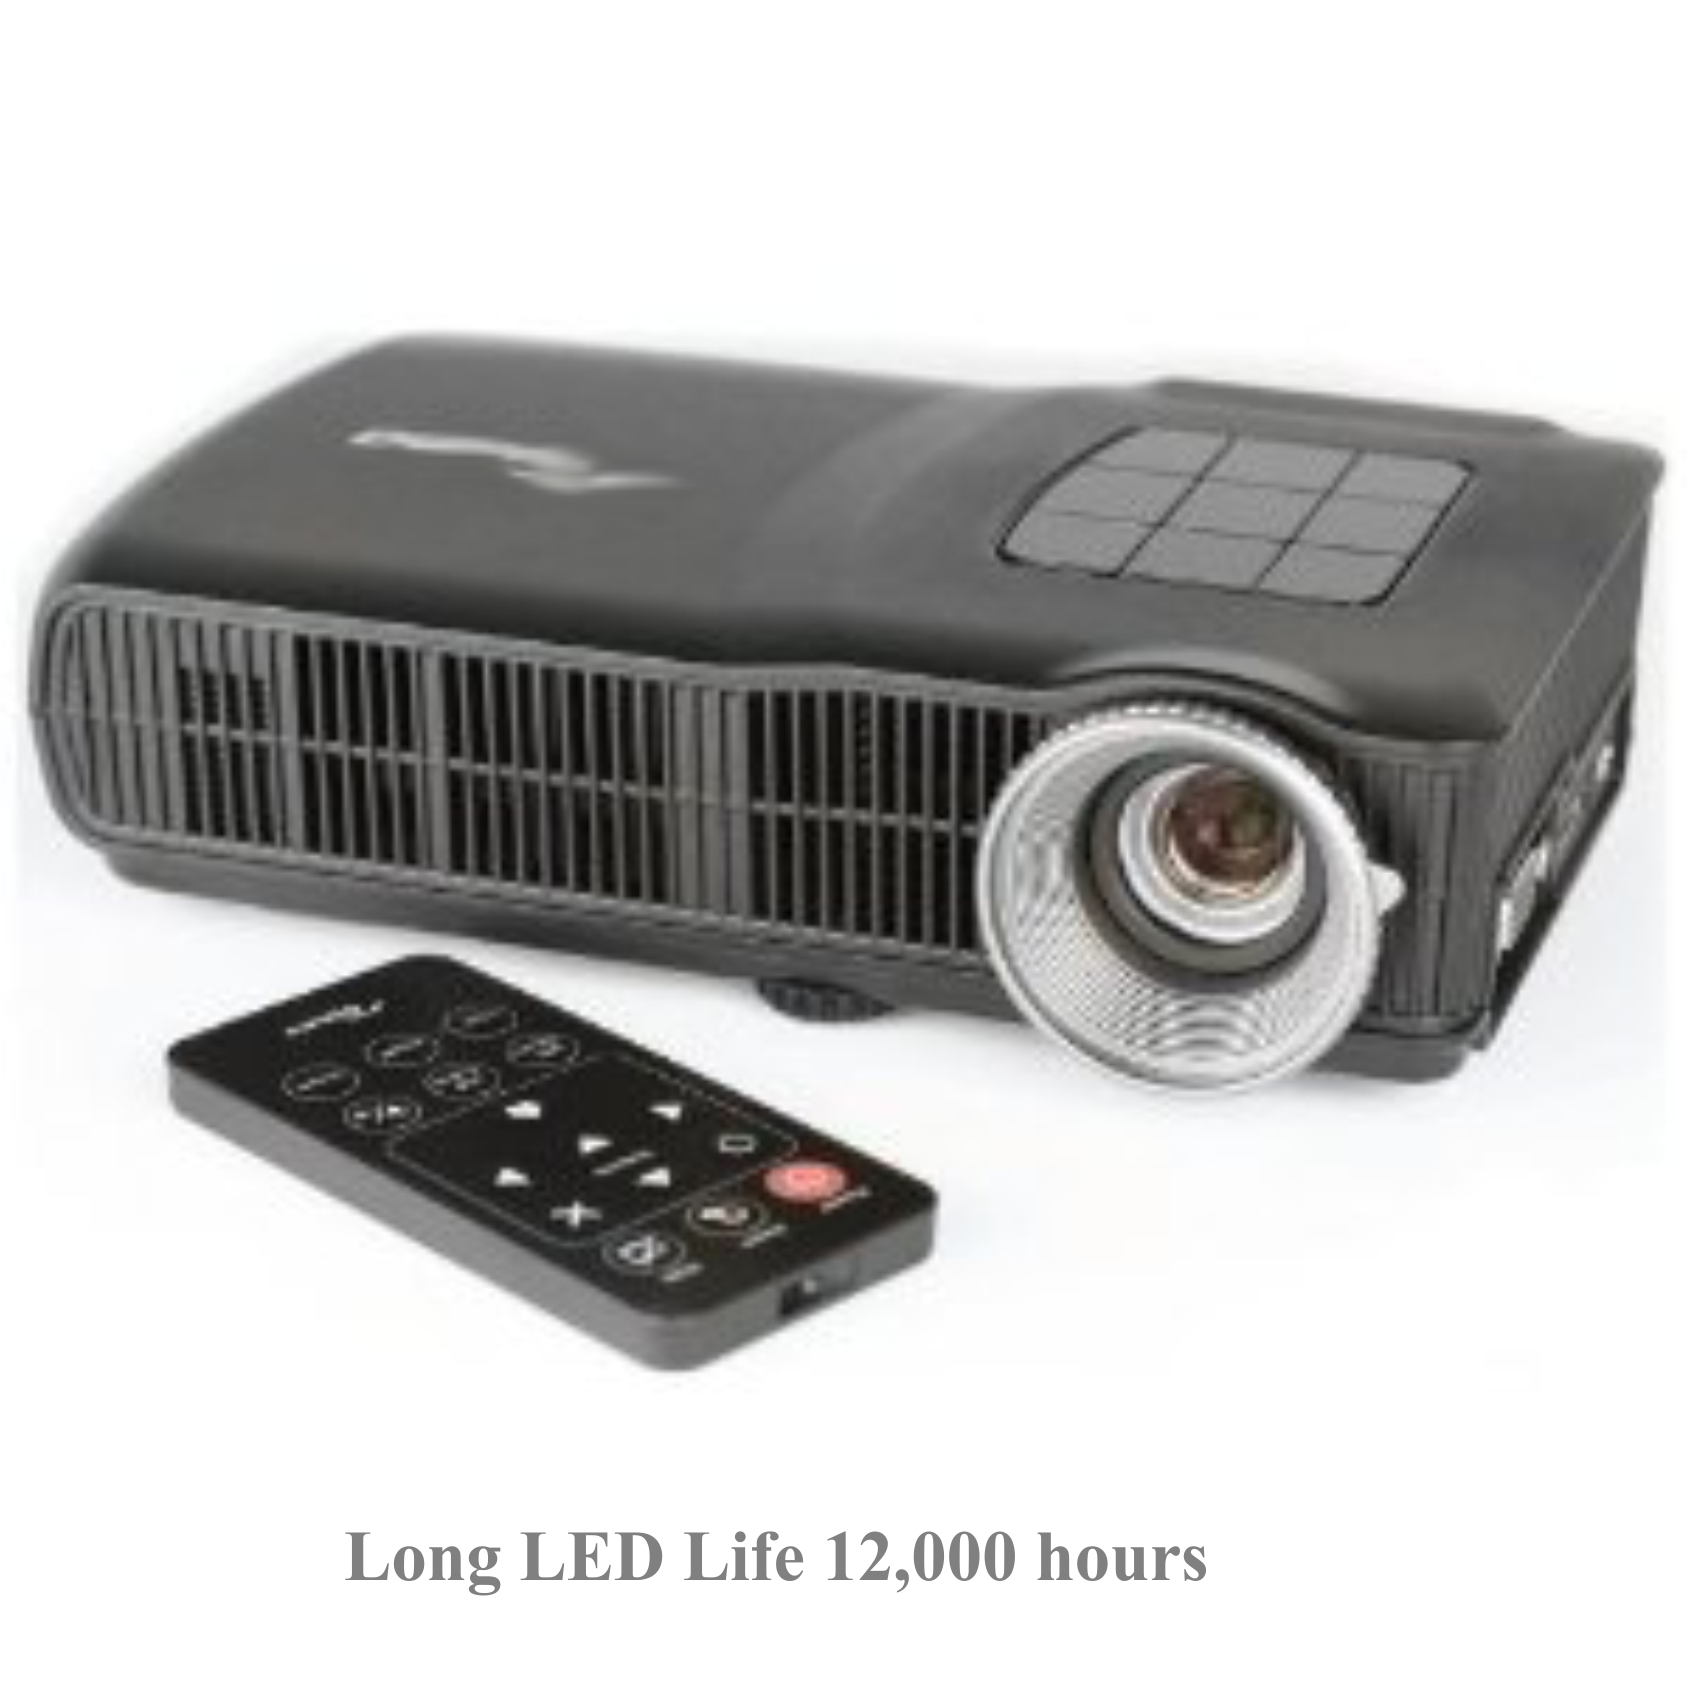 Indoor and outdoor DLP Video Projector for Holiday projections